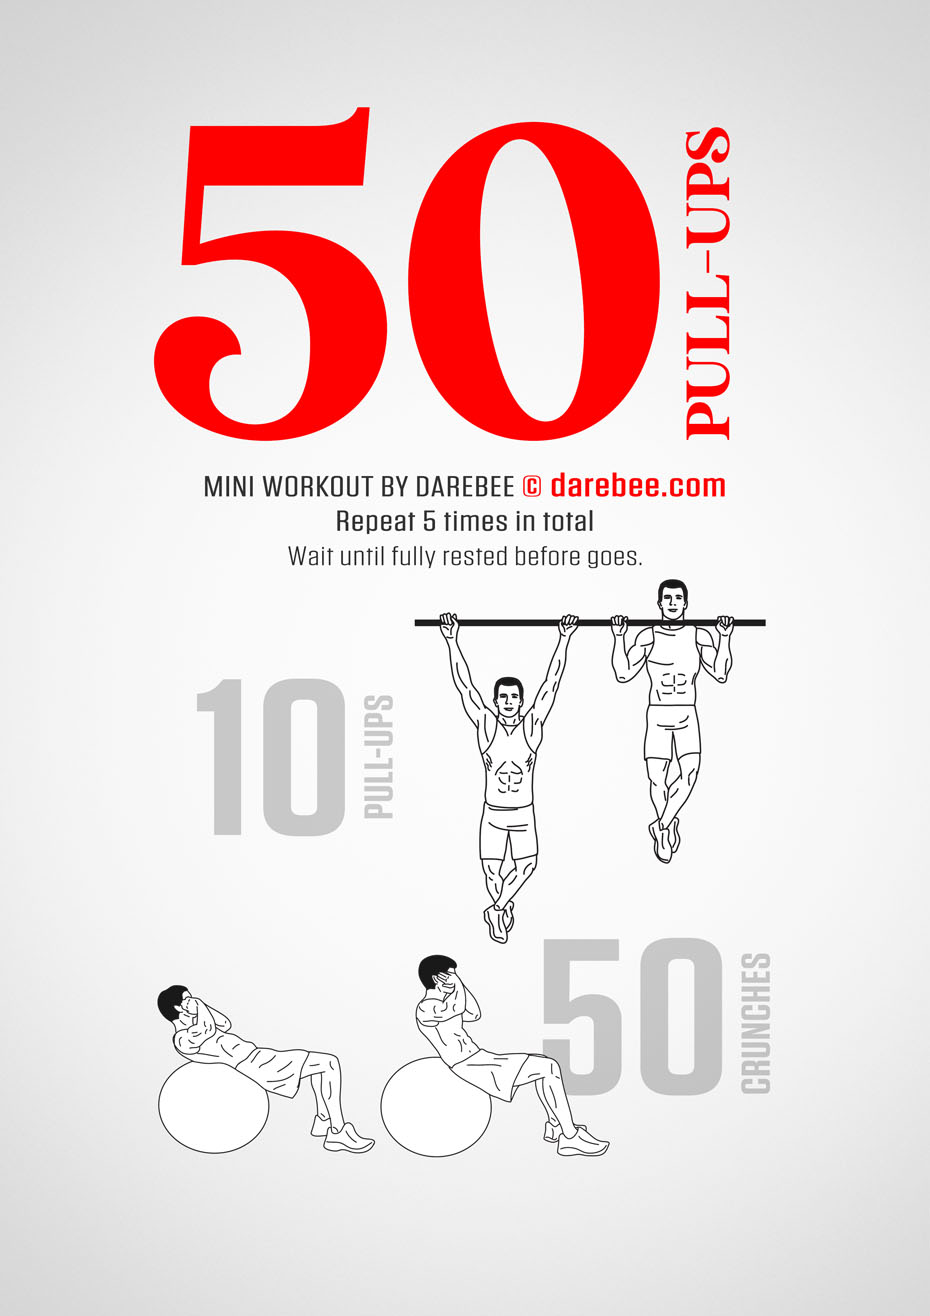 50 Pull-Ups is a DAREBEE pull-up bar home-fitness workout that is designed to help you level up on your upper body strength and fitness goals.